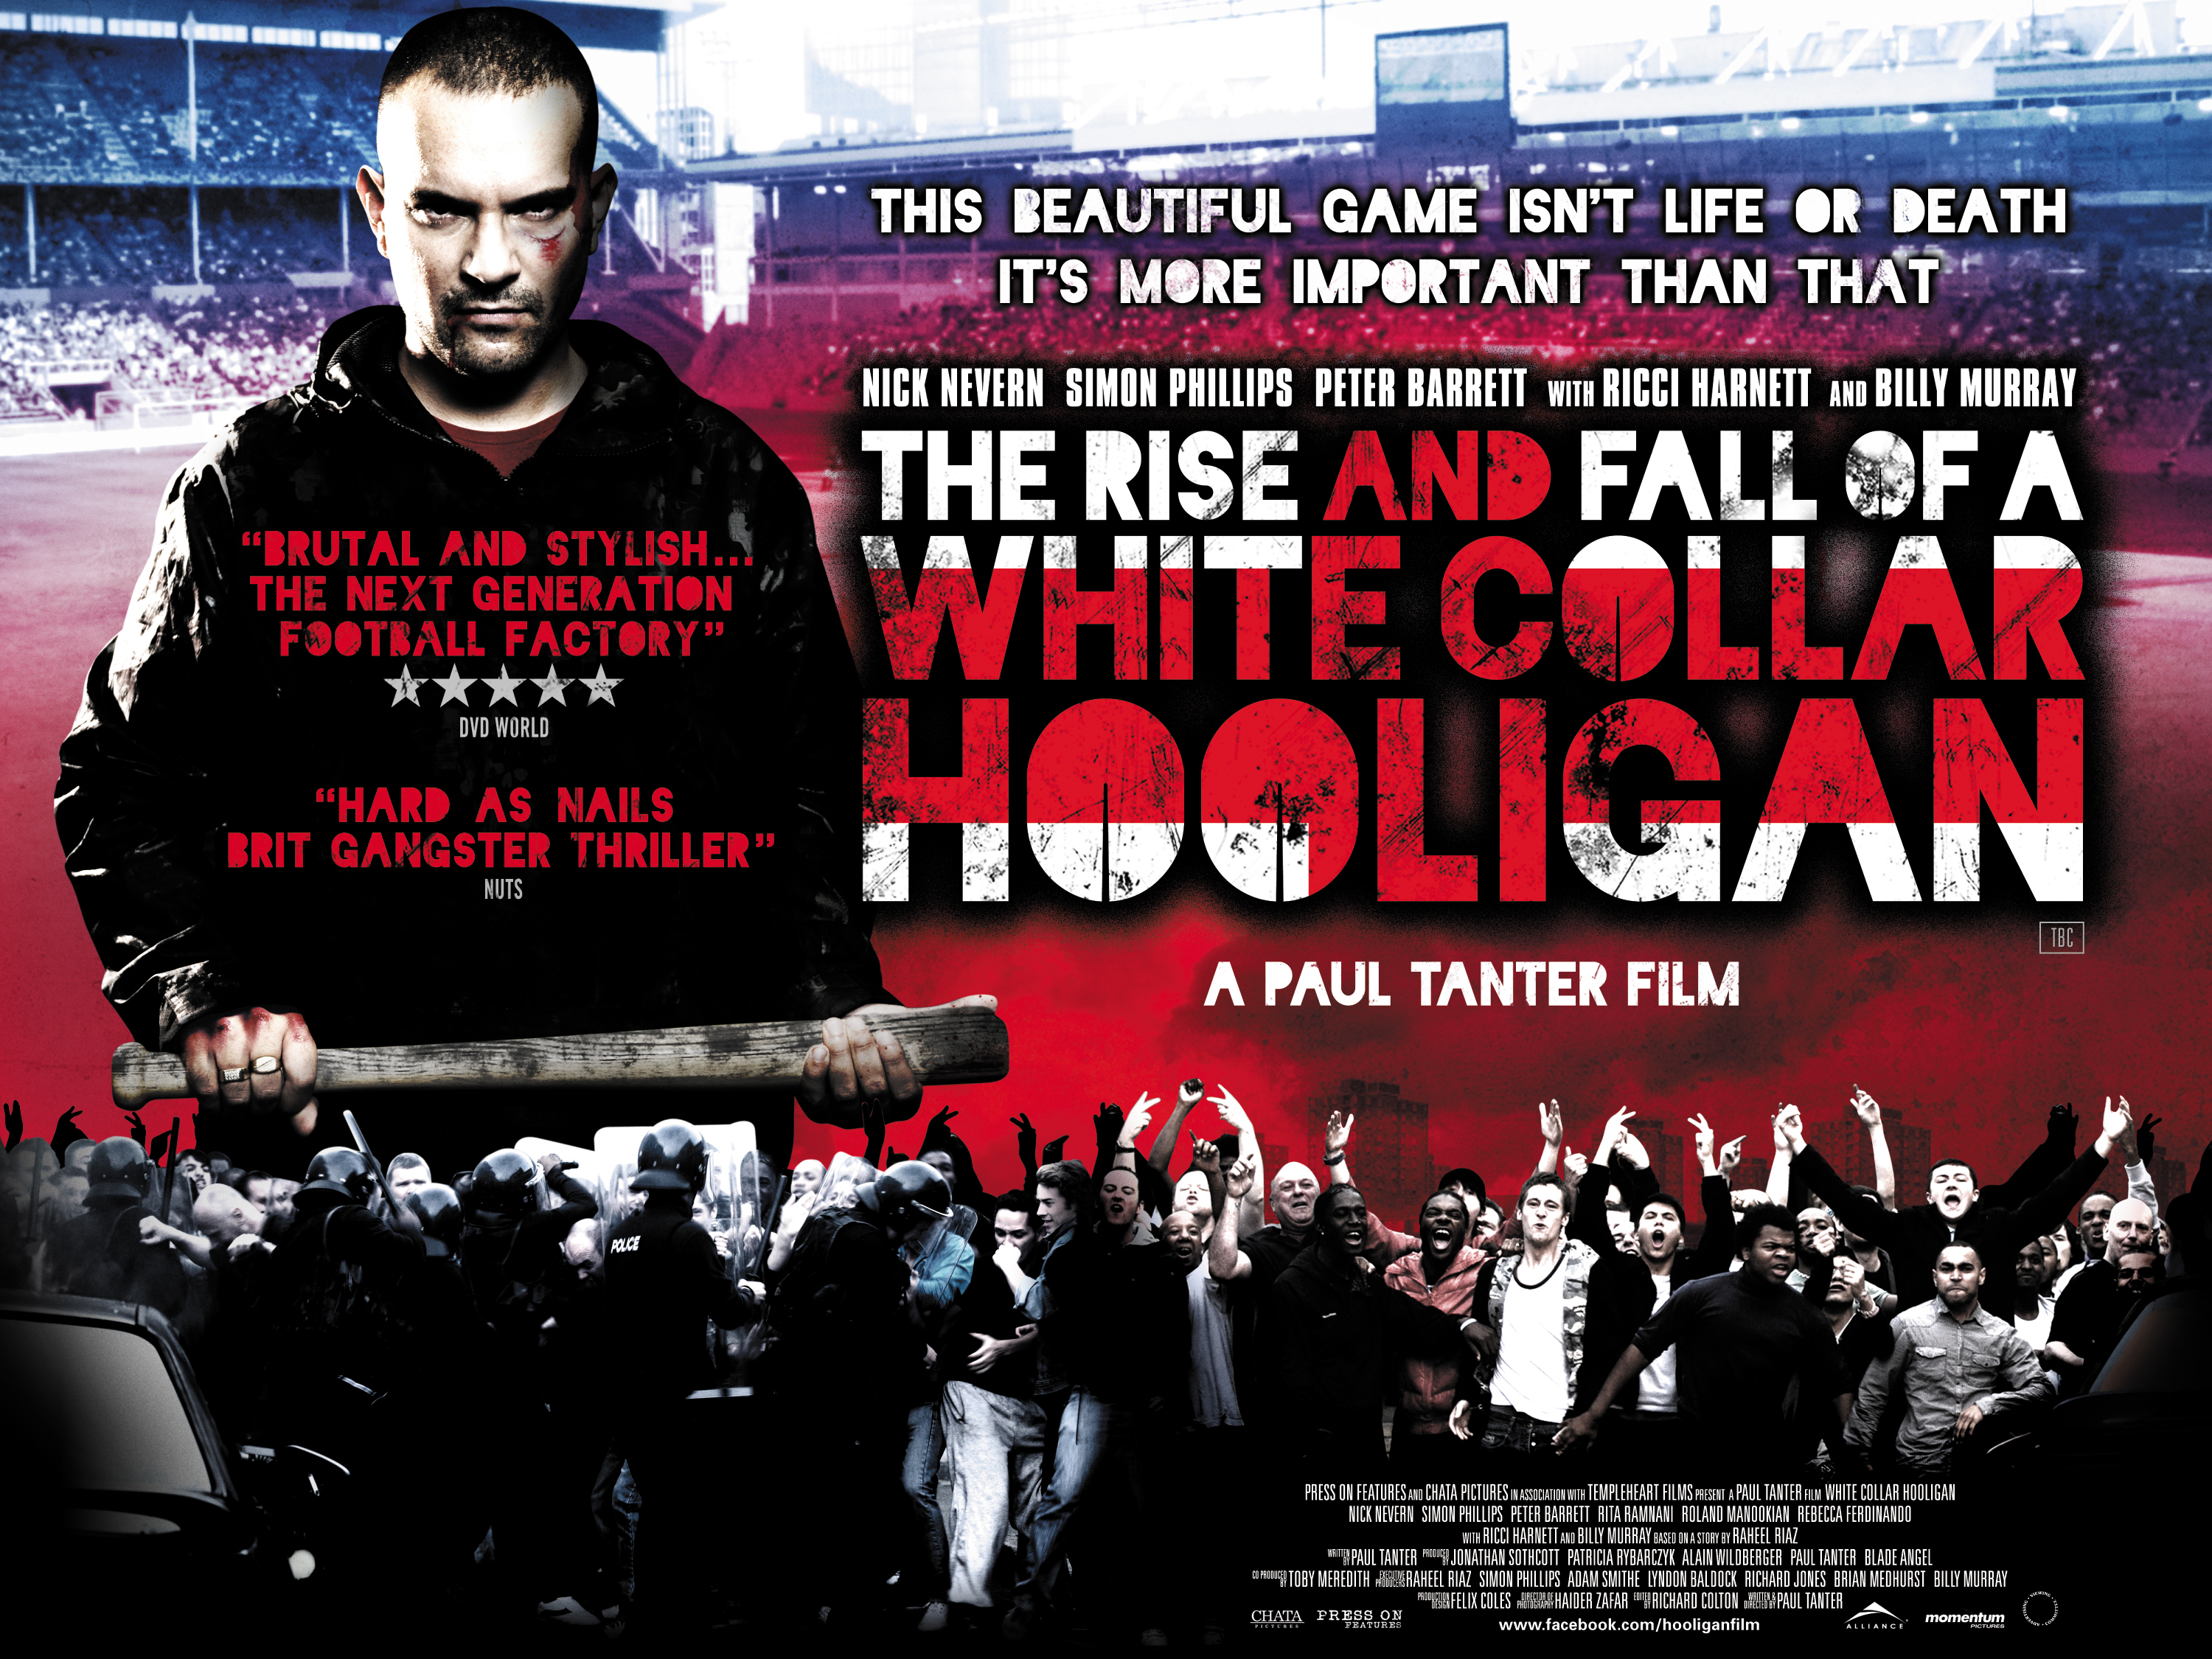 The Rise and Fall of a White Collar Hooligan UK quad poster.